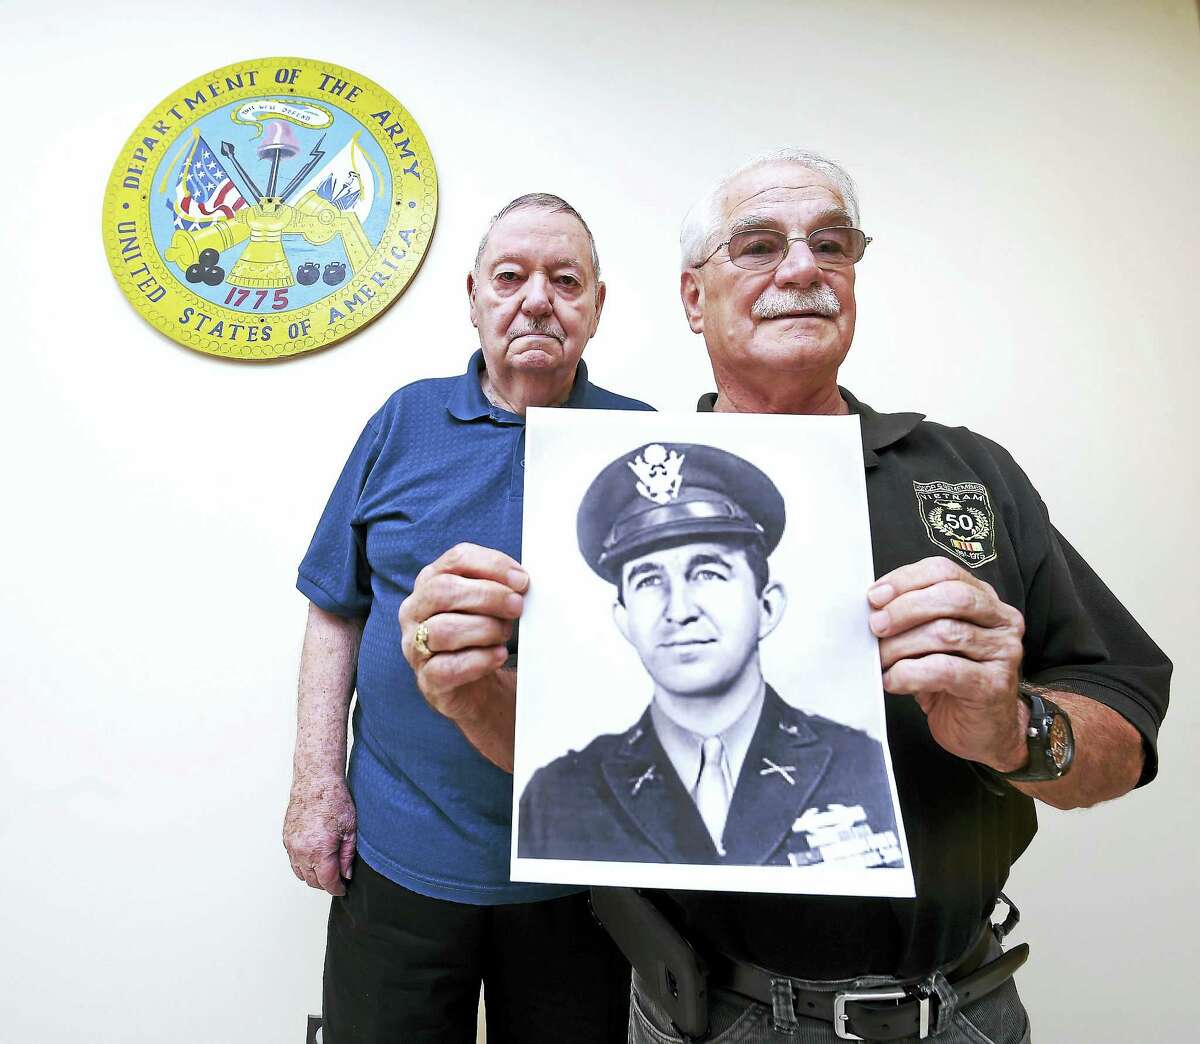 Frank Carrano (left) of East Haven and Daniel McHale of Avon are pictured with a photograph of Robert Nett from his days as a captain in the U.S. Army during World War II.